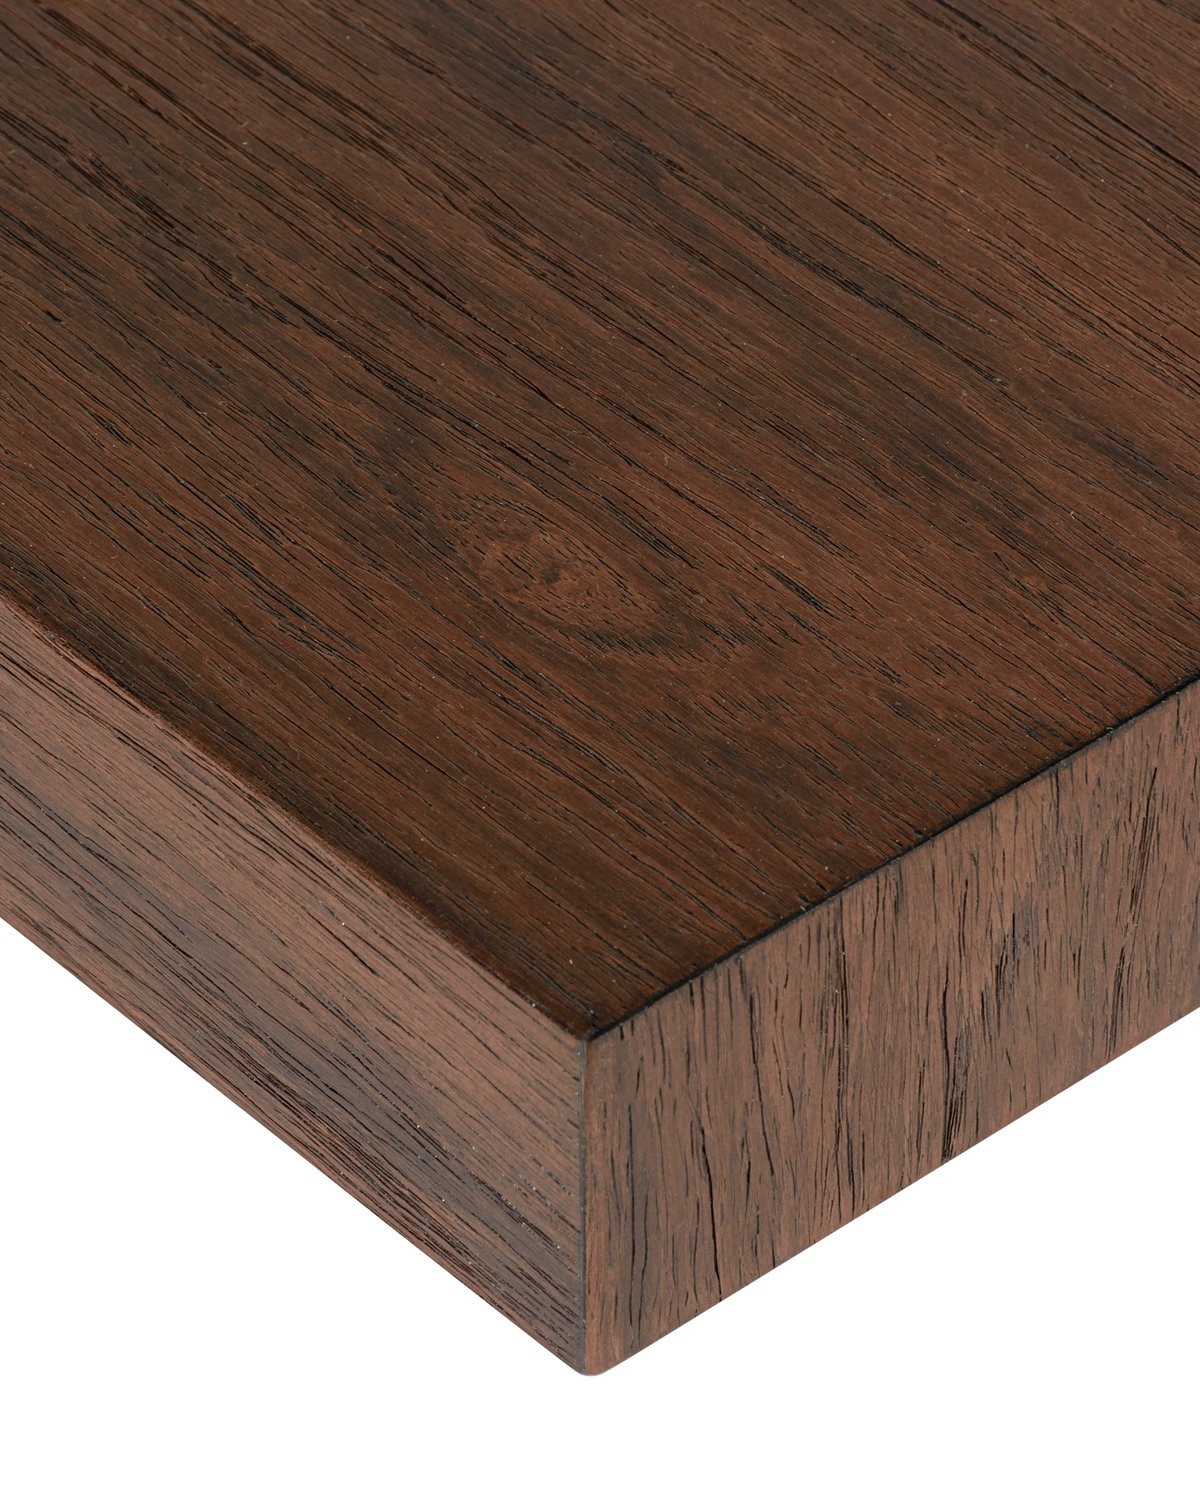 PIERS COFFEE TABLE - Image 3